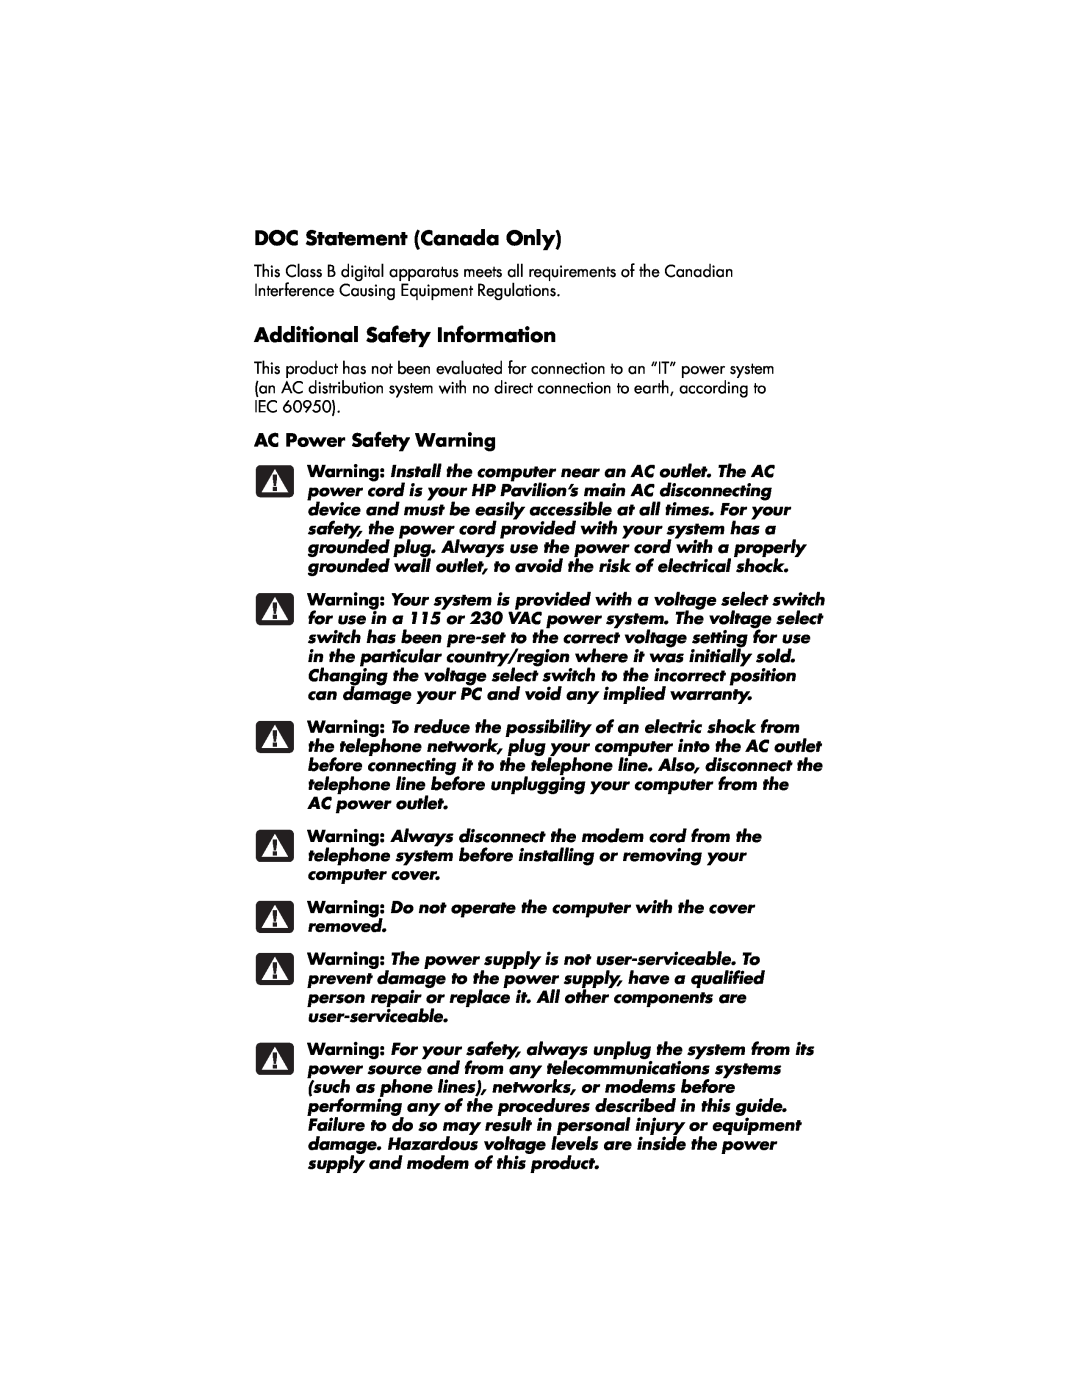 HP 304w (US), 734n (US/CAN), 524w (US) DOC Statement Canada Only, Additional Safety Information, AC Power Safety Warning 